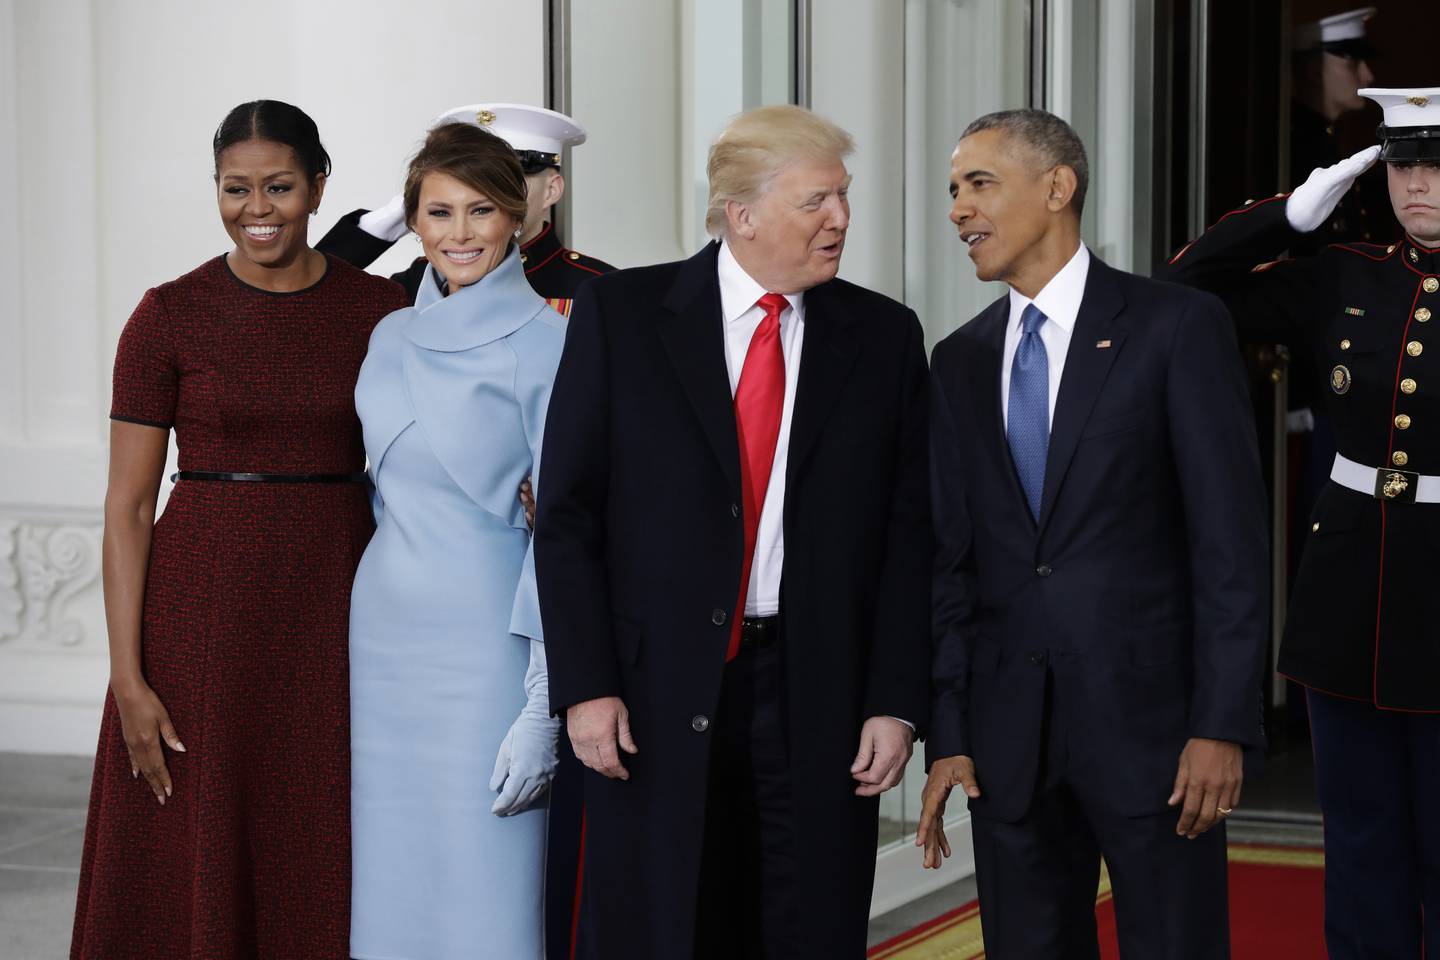 In a Friday, Jan. 20, 2017 file photo, President Barack Obama and first lady Michelle Obama pose with President-elect Donald Trump and his wife Melania at the White House in Washington. Before he left office in January, President Barack Obama offered his successor accolades and advice in a private letter that underscored some of his concerns as he passed the baton.  In the letter, published Sunday, Sept. 3, 2017, by CNN, Obama urged President Donald Trump to ?Äúbuild more ladders of success for every child and family,?Äù to ?Äúsustain the international order?Äù and to protect ?Äúdemocratic institutions and traditions.?Äù(AP Photo/Evan Vucci, File)